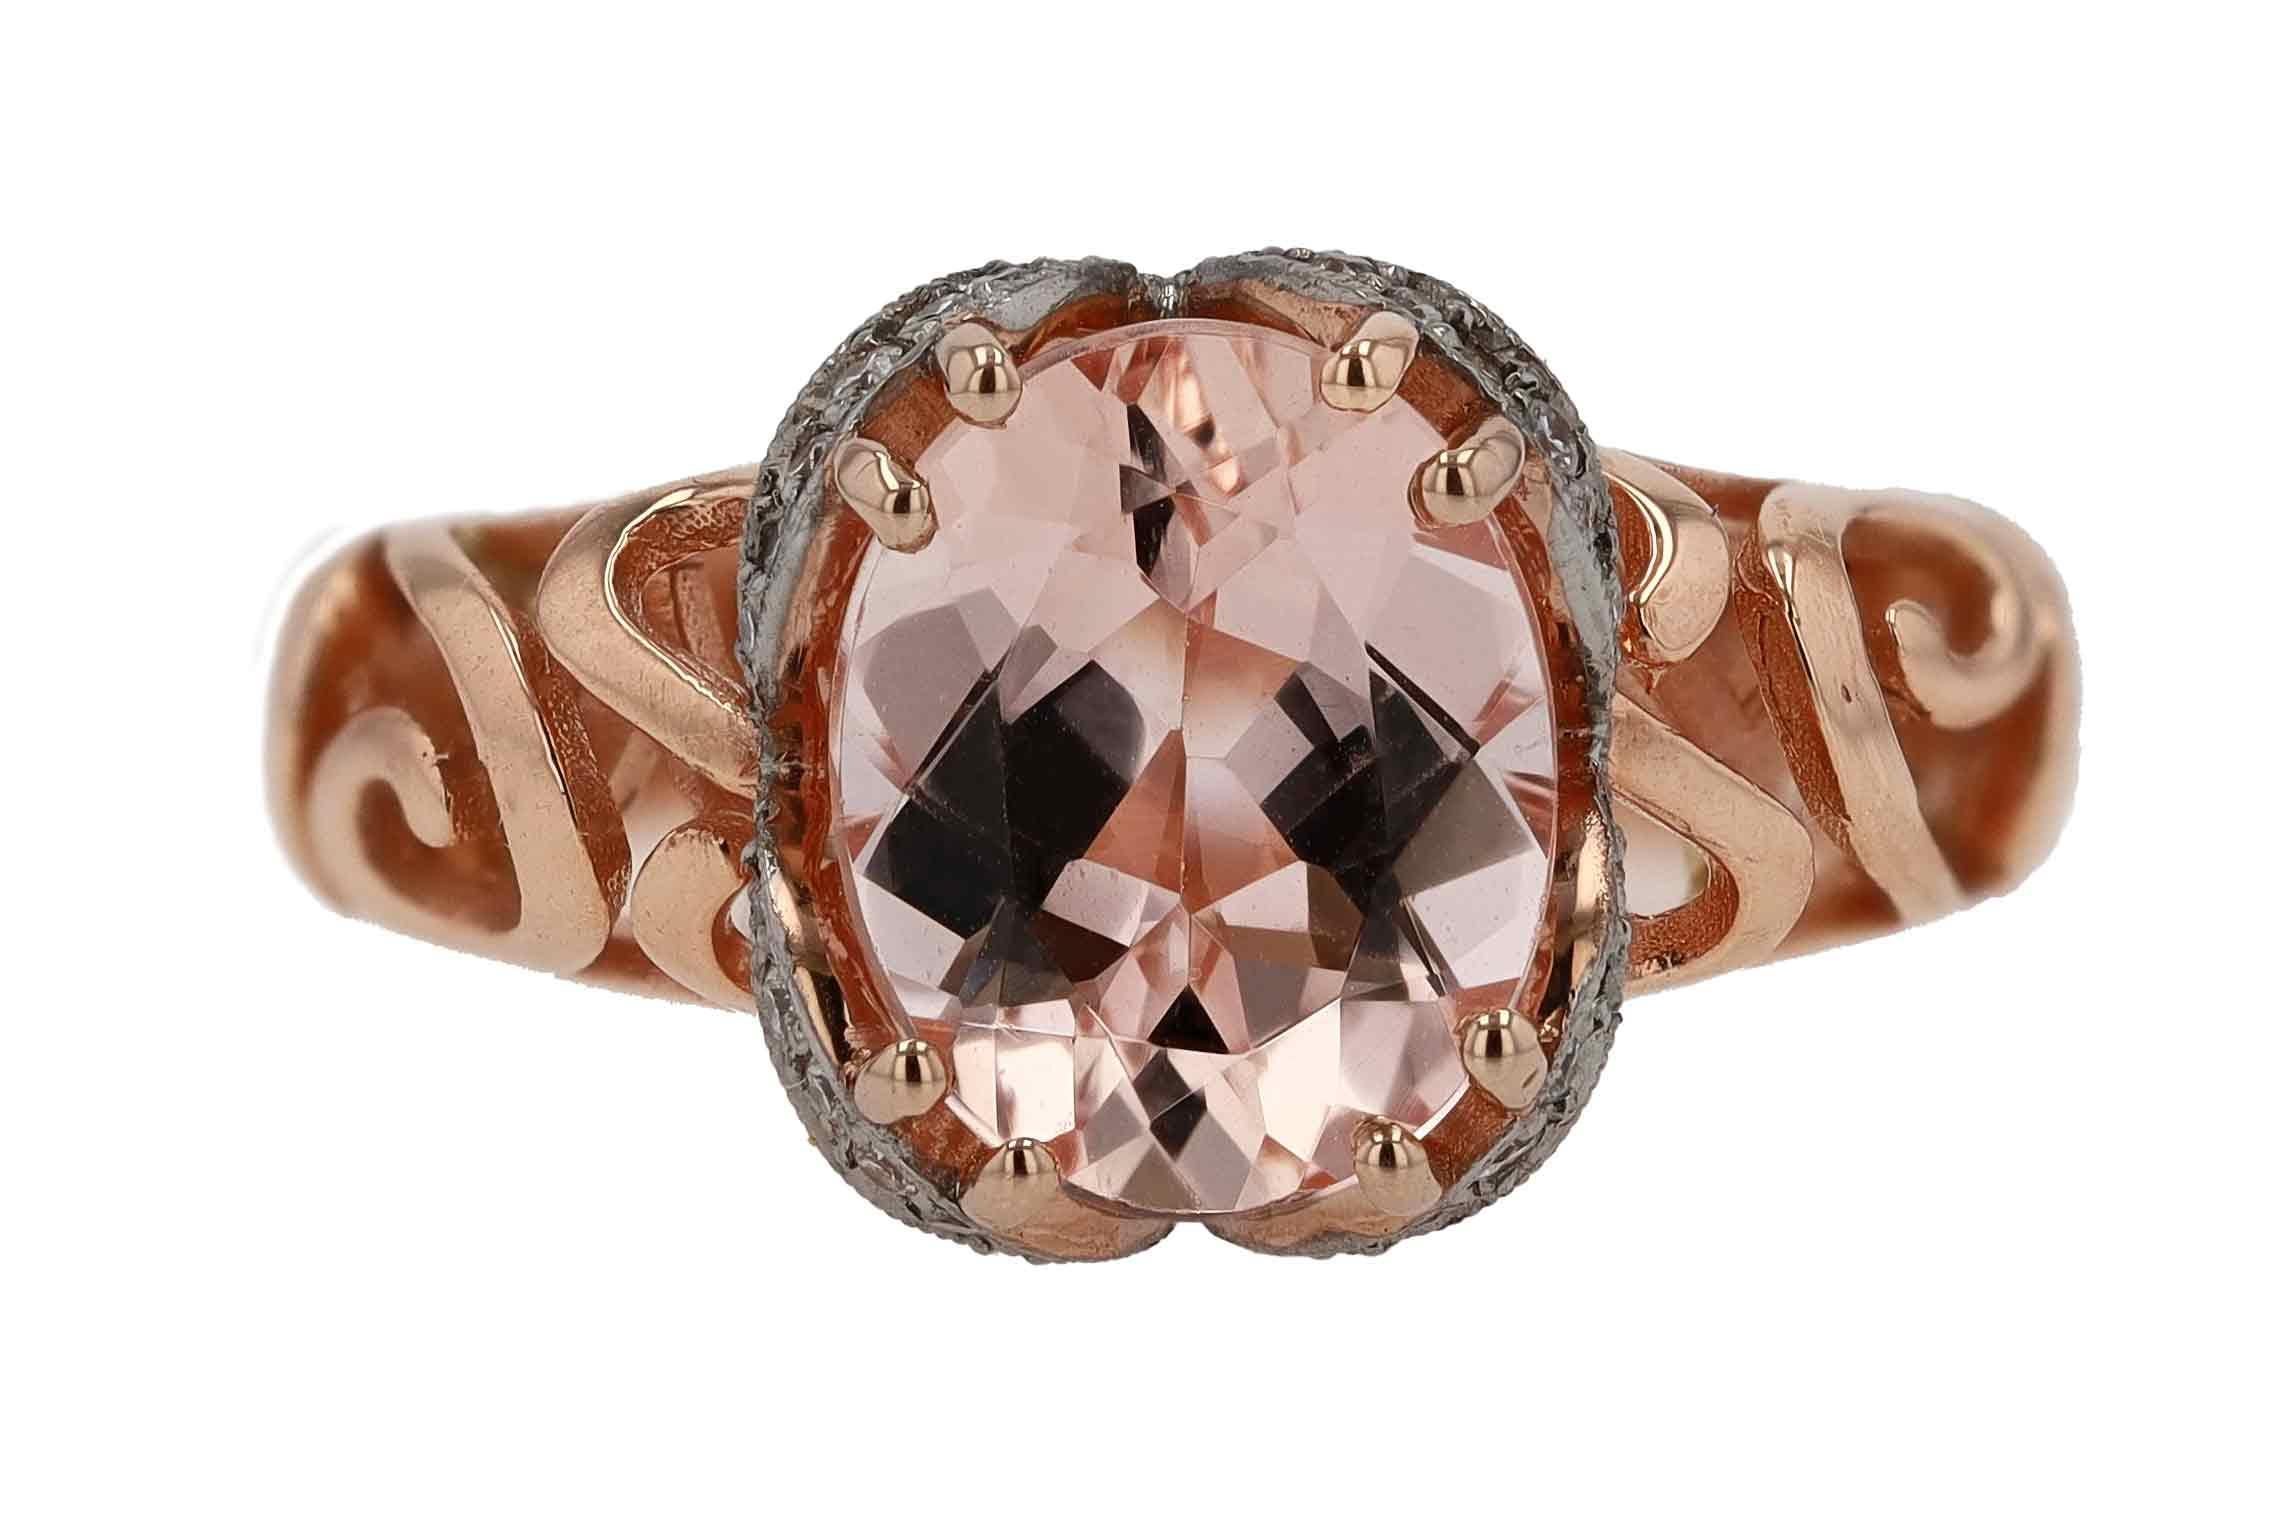 This unforgettable modern morganite cocktail ring is an affordable jewel from our Bella Rosa Galleries design team. Handcrafted 14 karat rose gold features broad filigree open work. This stunning gemstone creation doubles as an engagement or wedding